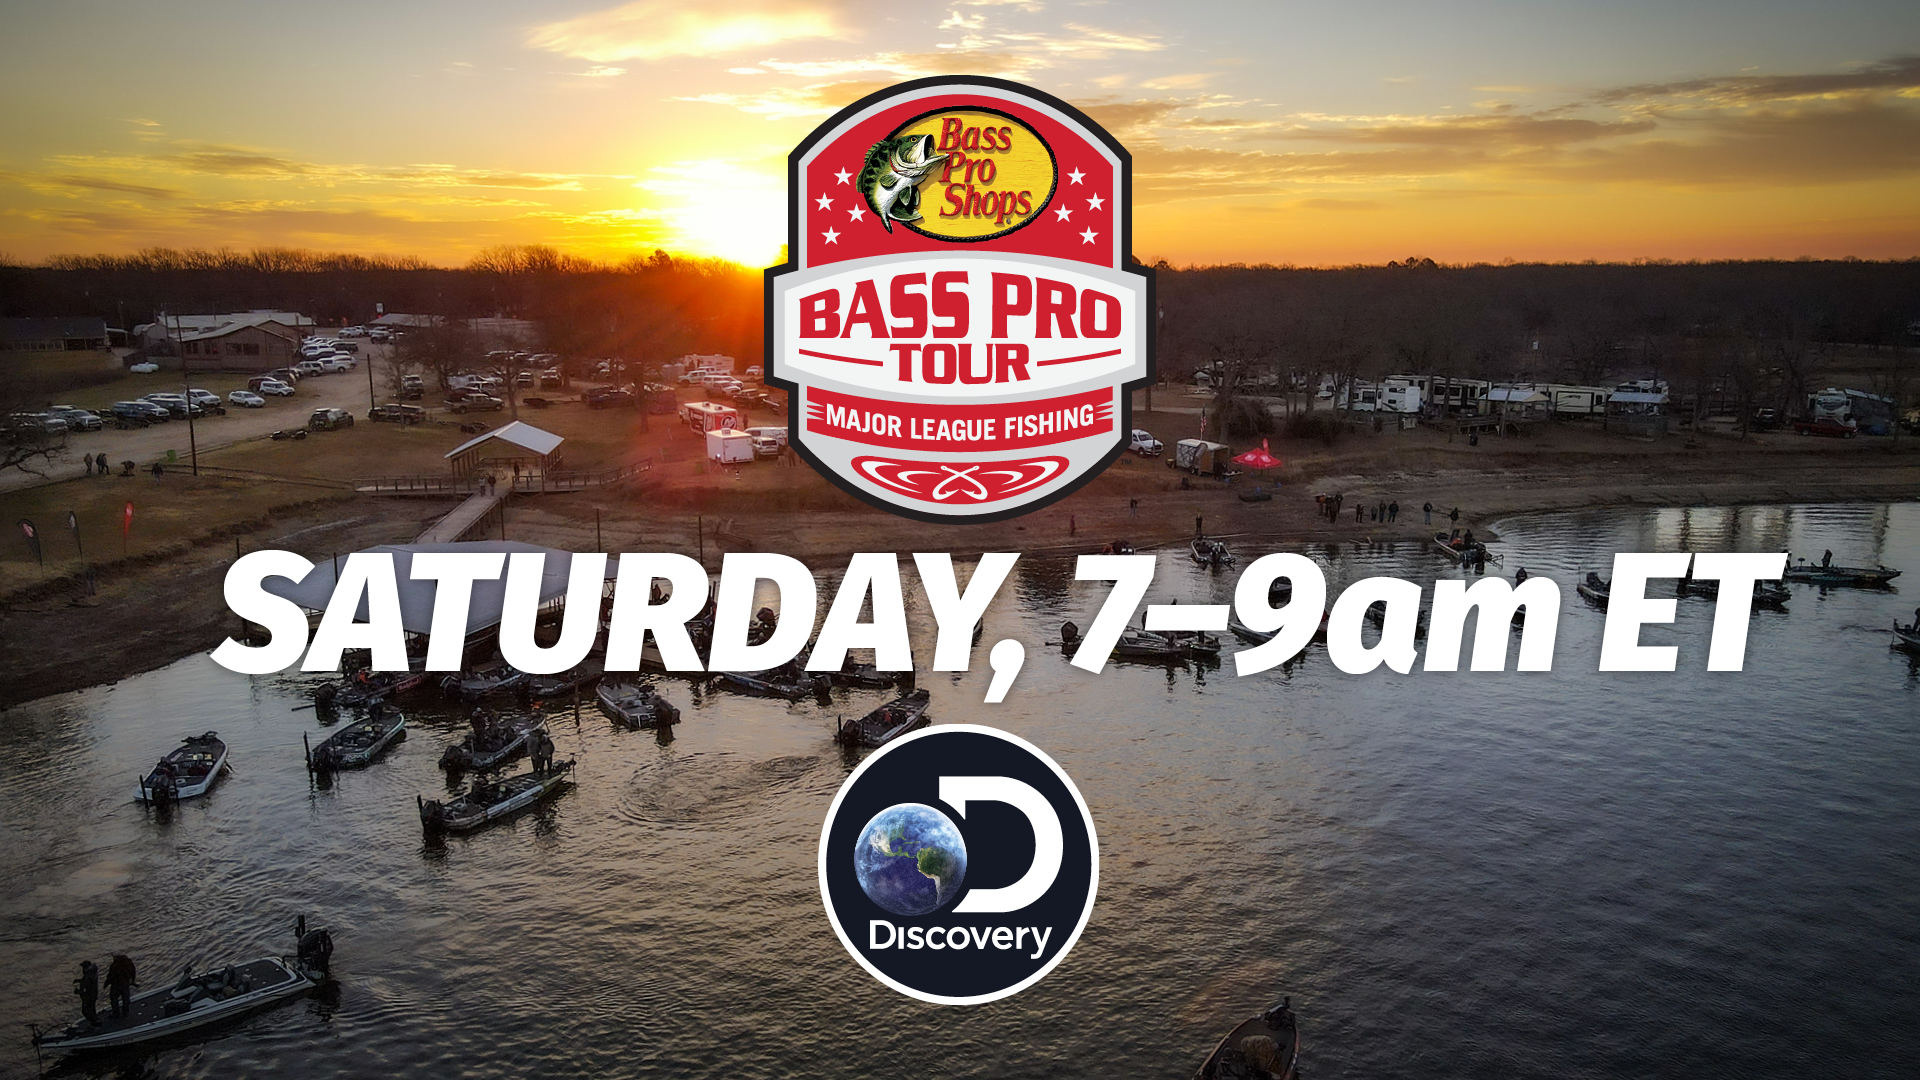 Bass Pro Shops coming to Midland - Permian Proud